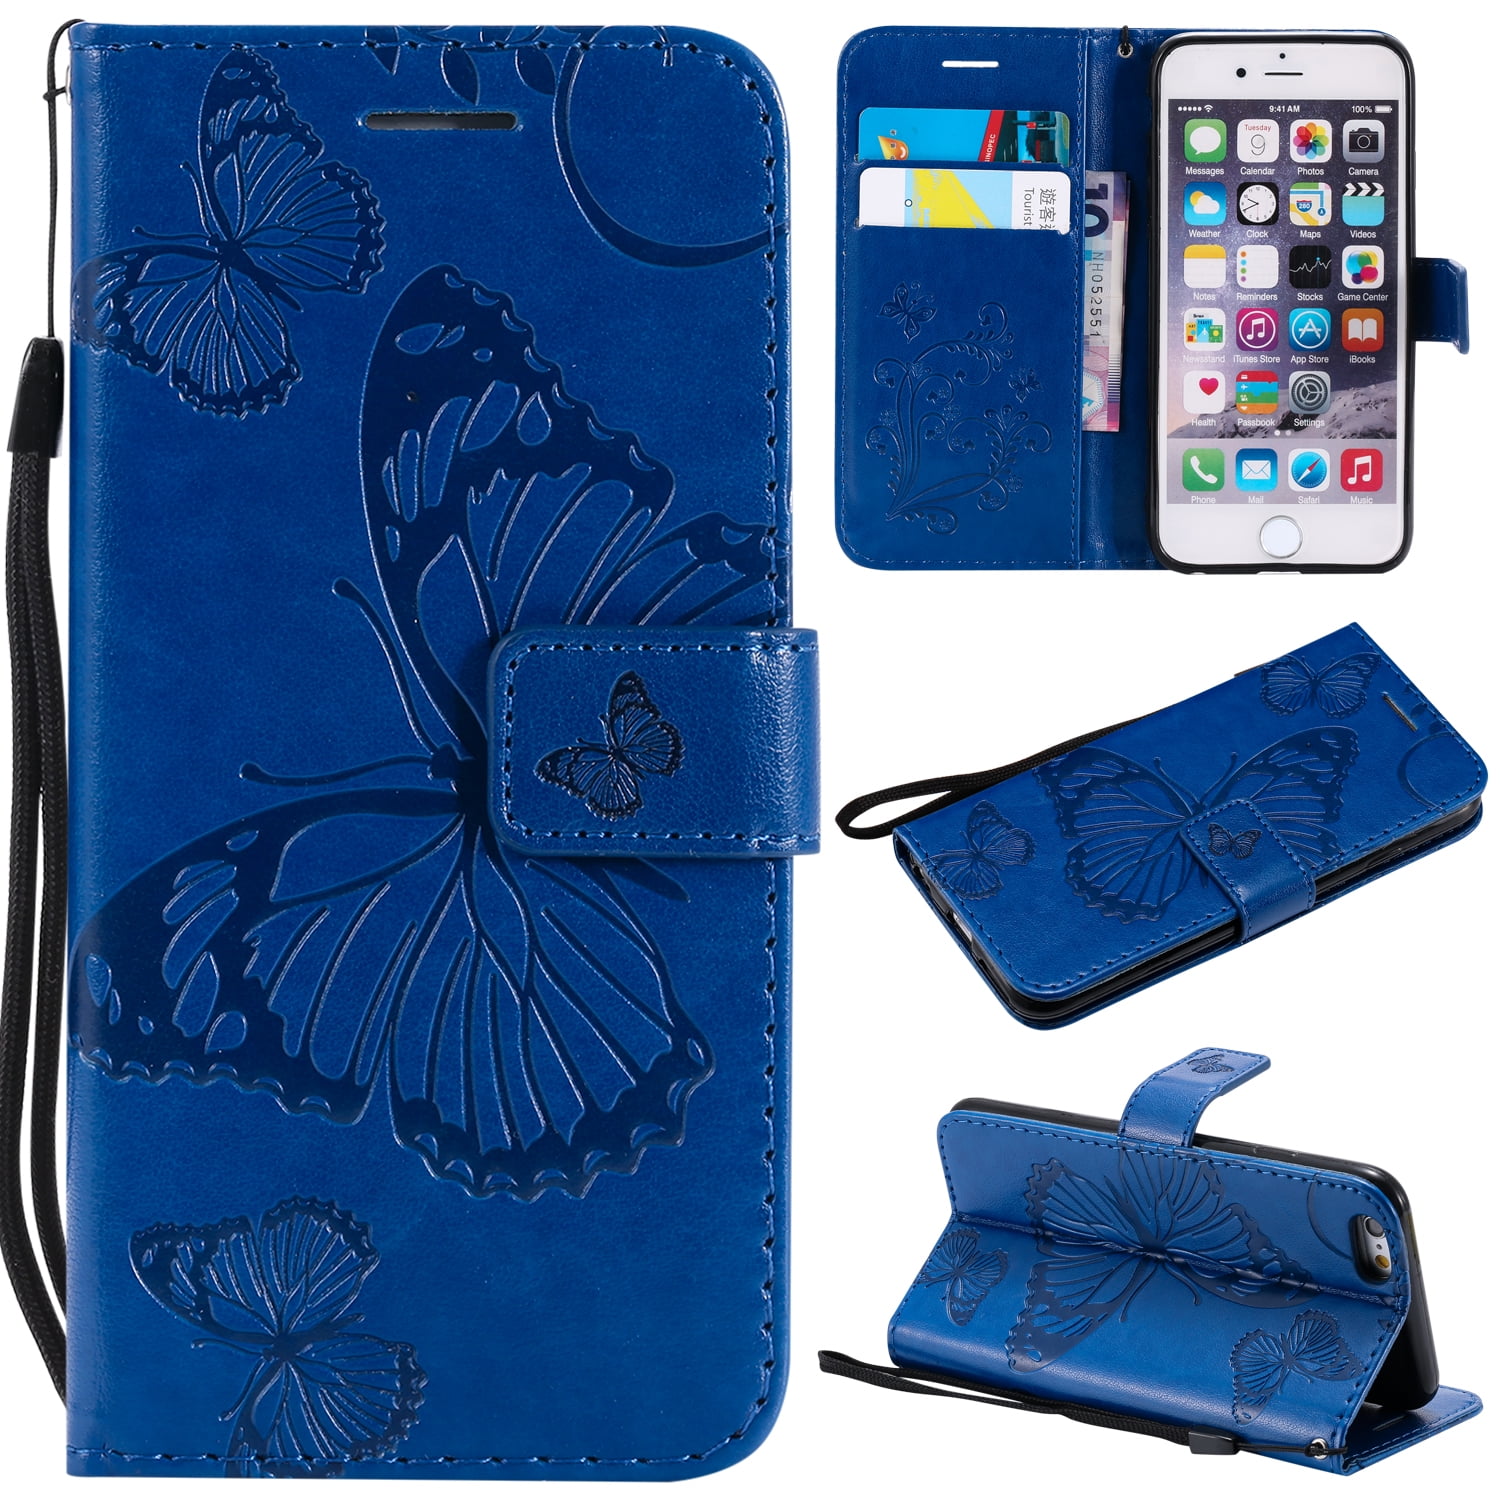 DENDICO iPhone 6 / iPhone 6s Wallet Case Flip Folio Book Case Full Body Protection with Card Holder for Apple iPhone 6 / iPhone 6s Green Premium Leather Cover with Butterfly Design 